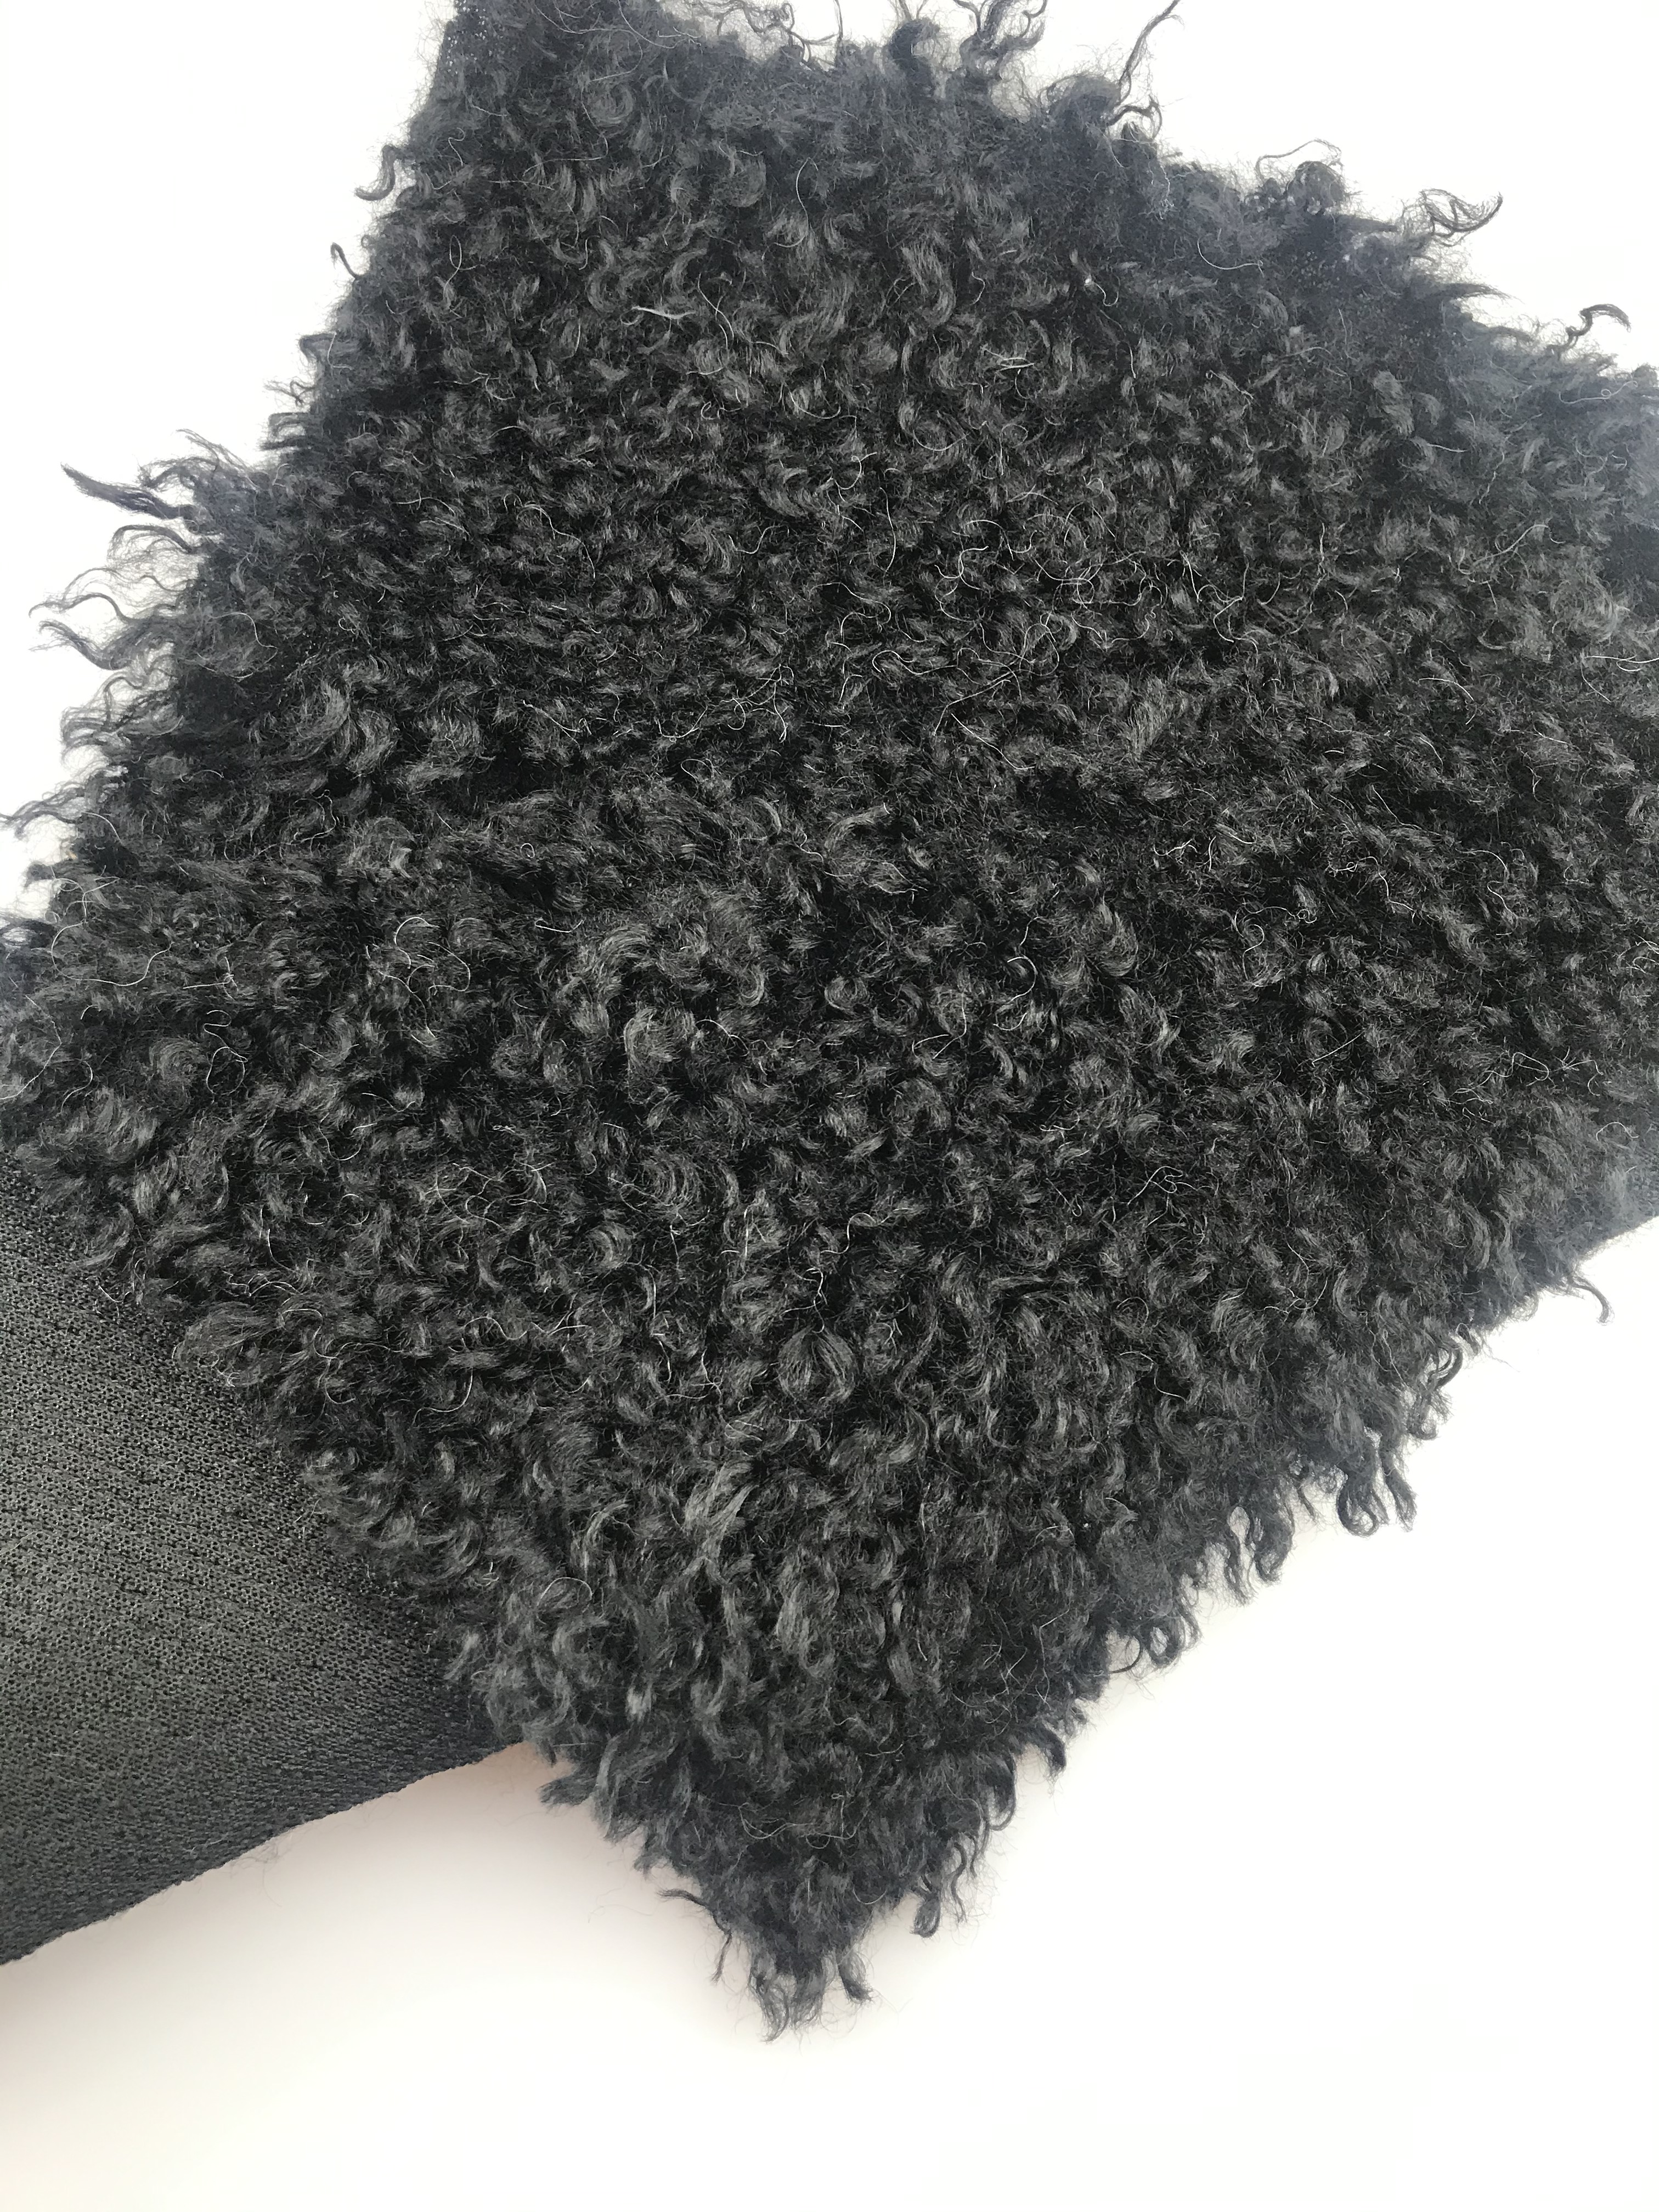 shearling couch Plush fabric